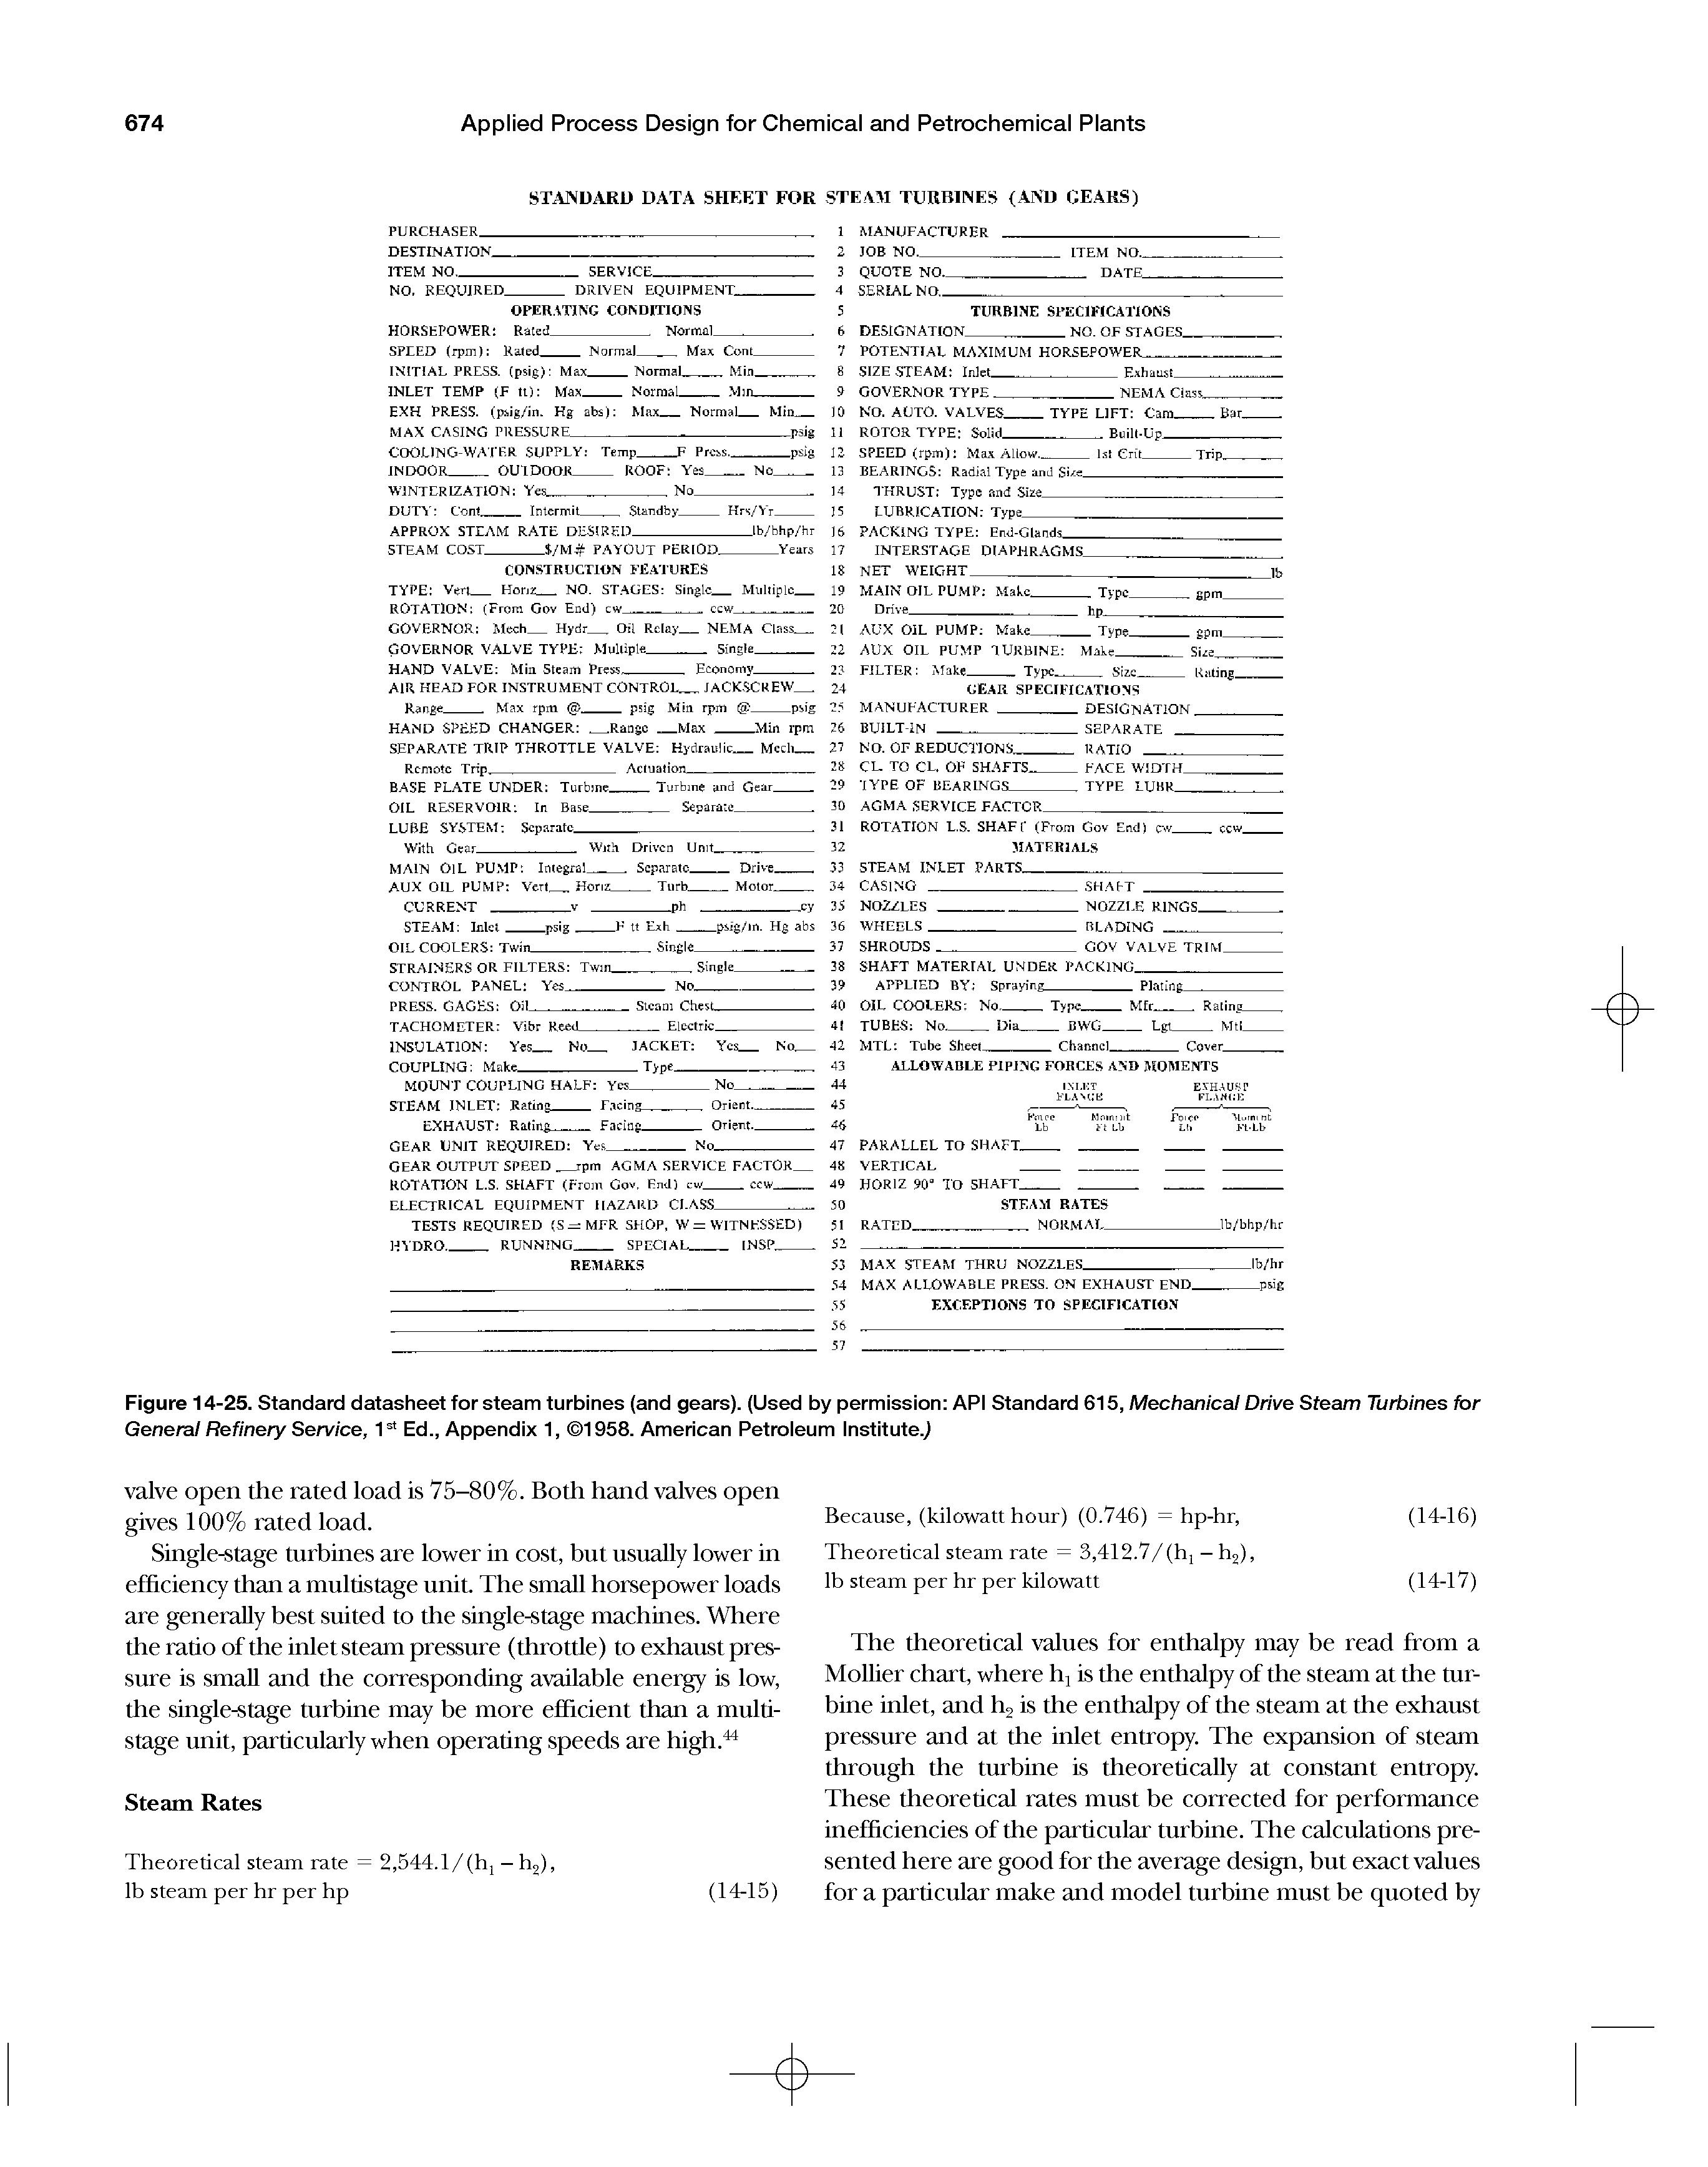 Figure 14-25. Standard datasheet for steam turbines (and gears). (Used by permission API Standard 615, Mechanical Drive Steam Turiiines for General Refinery Service, 1= Ed., Appendix 1, 1958. American Petroleum Institute.)...